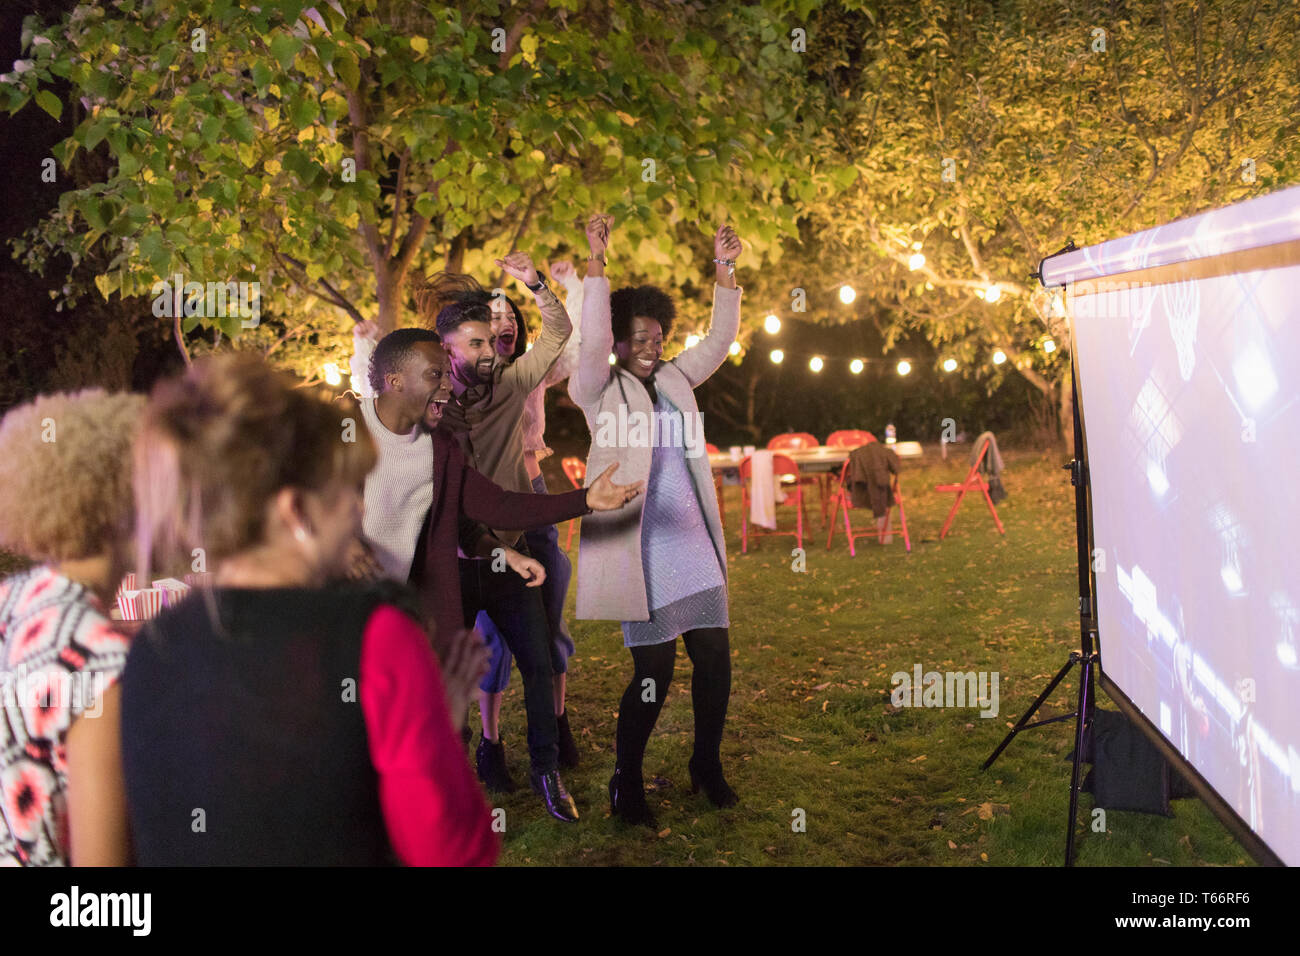 Friends cheering, watching basketball on projection screen in backyard Stock Photo